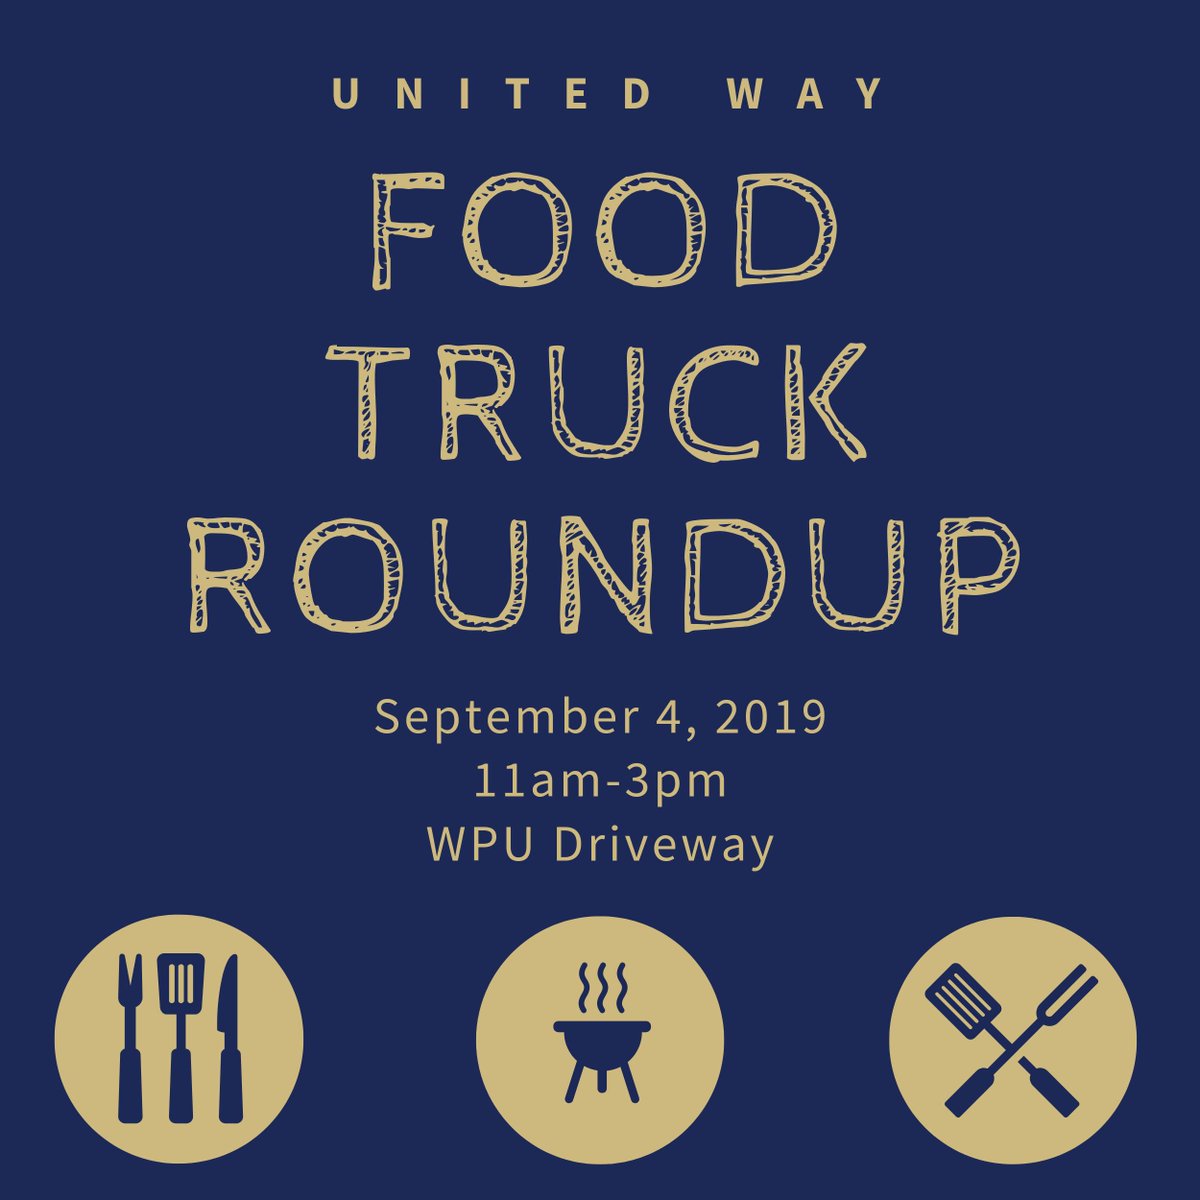 Mark your calendars! Our fall Food Truck Roundup benefiting the United Way will take place on Wednesday, September 4 from 11am-3pm on the WPU Driveway. Stay tuned for more details to come! 

#foodtruckroundup #pittsburghfoodtrucks #unitedway #pittevents